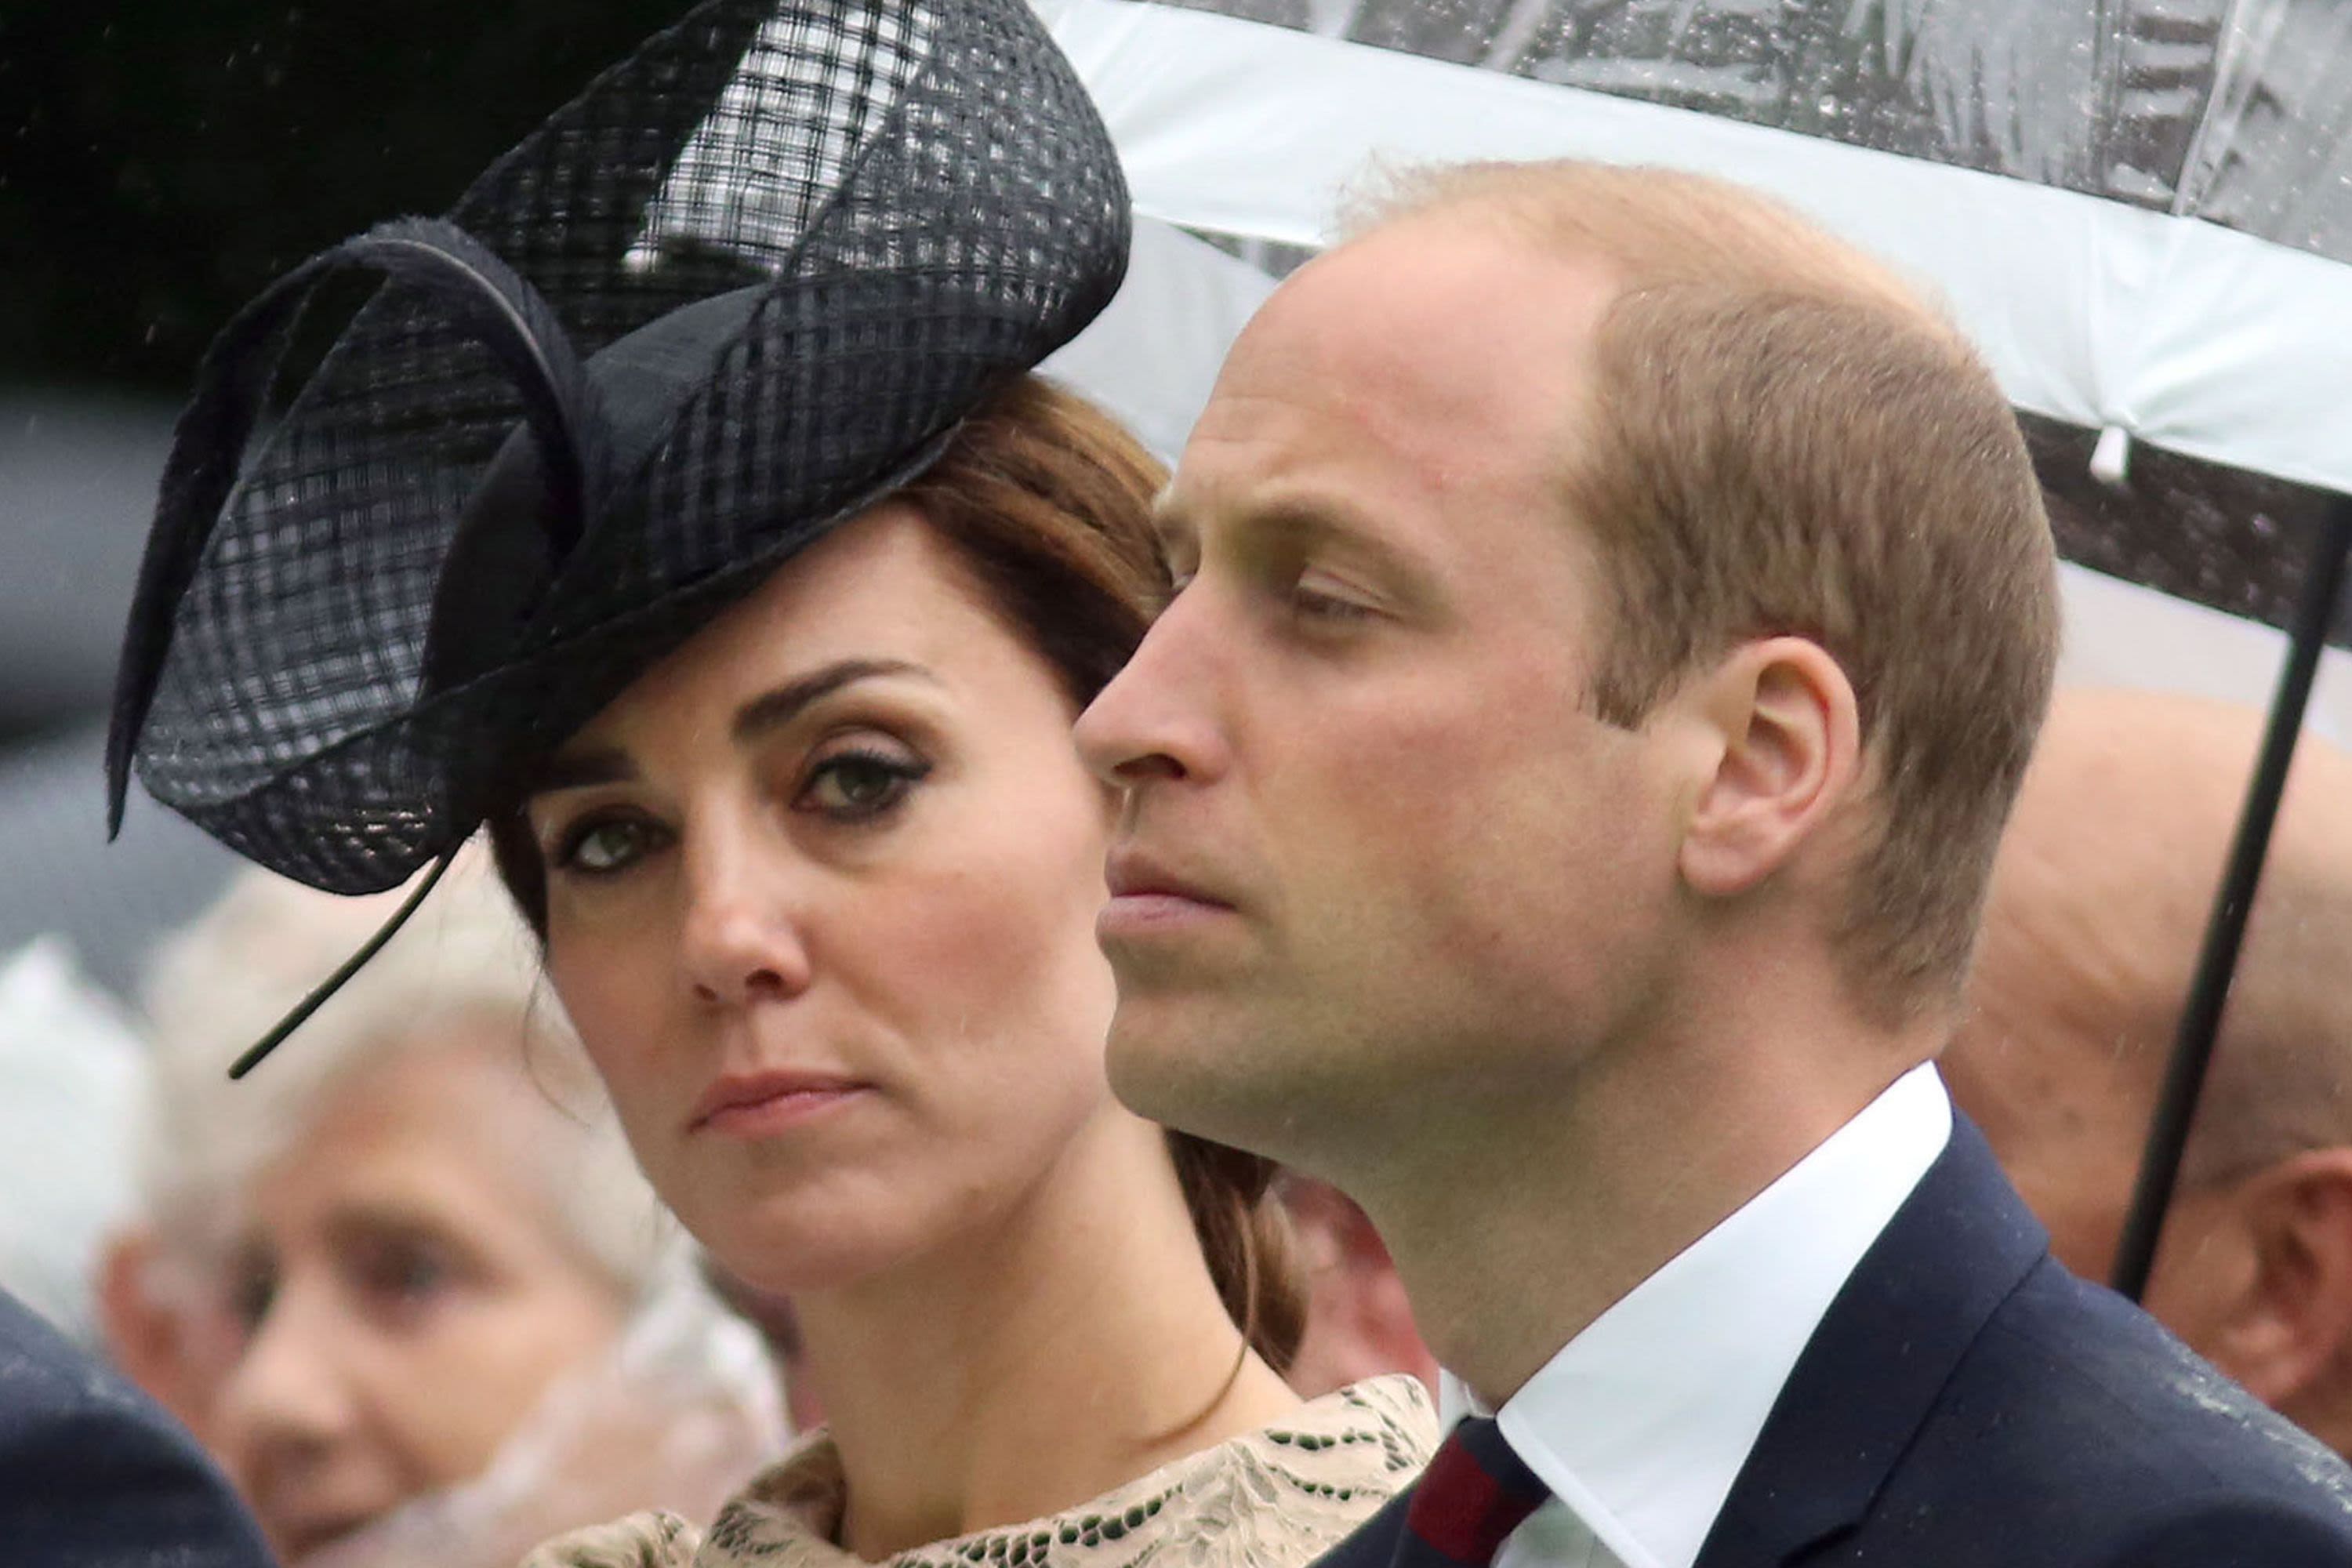 Princess Kate giving Prince William look caught on camera